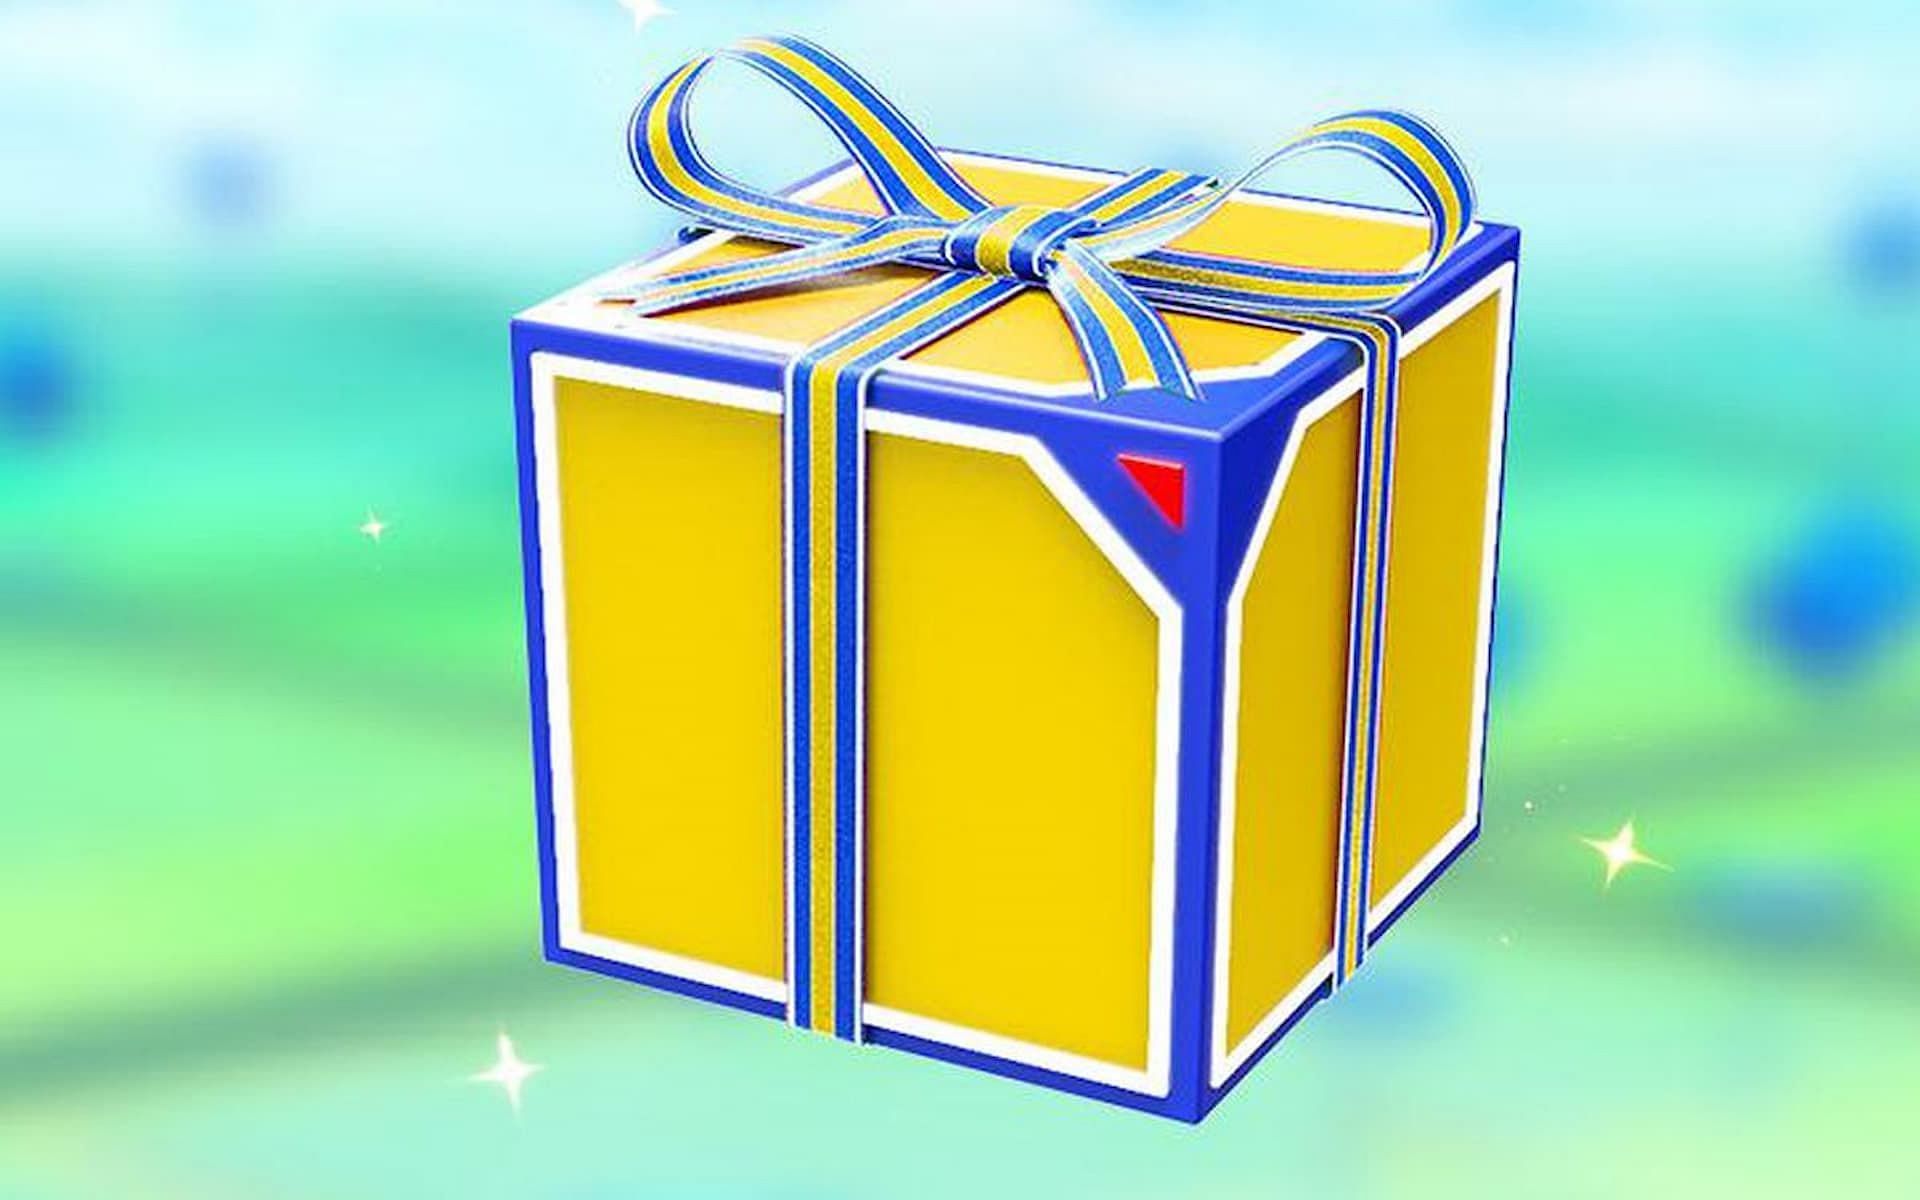 Pokemon GO offers multiple boxes filled with rewards that players can buy (Image via Niantic)